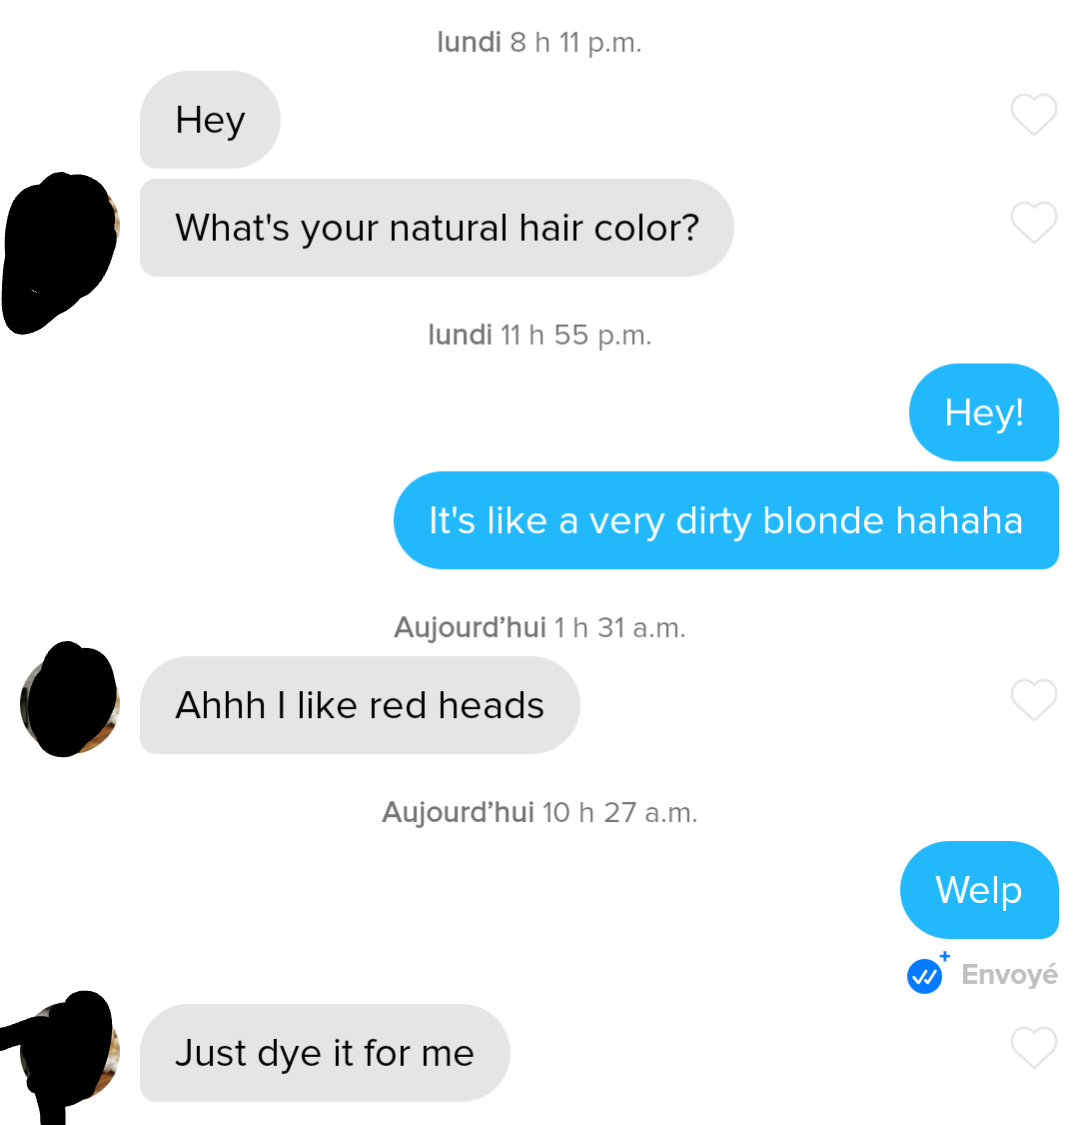 i like red heads, just dye it for me